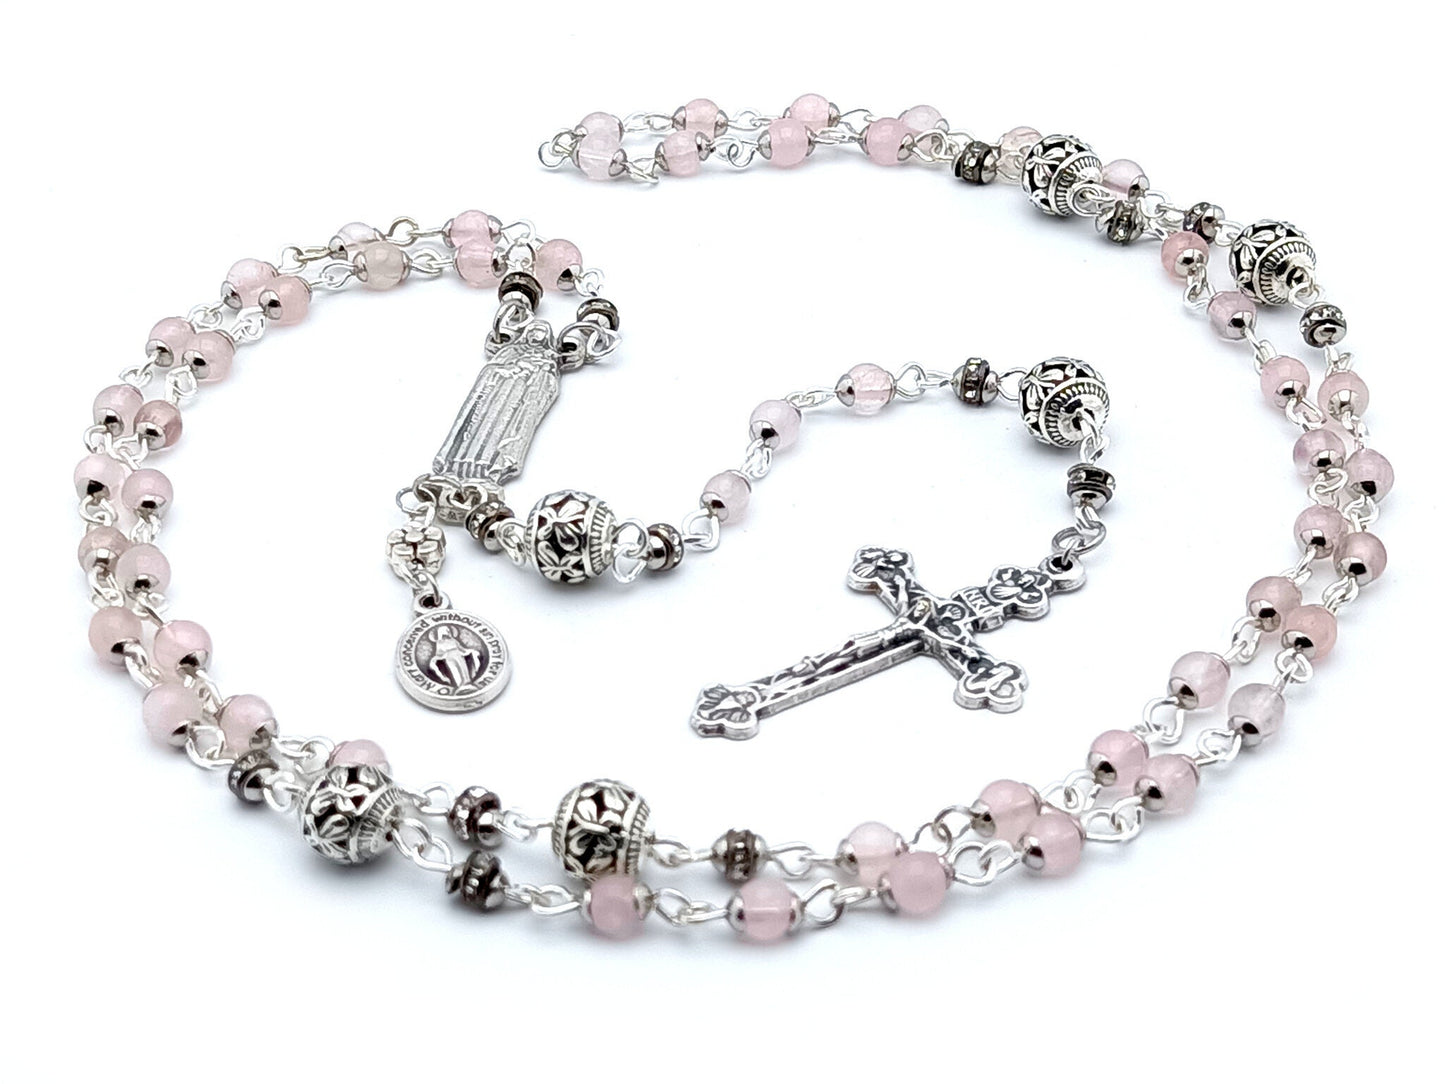 Saint Therese unique rosary beads with miniature pink opal gemstone beads, silver crucifix and centre medal.